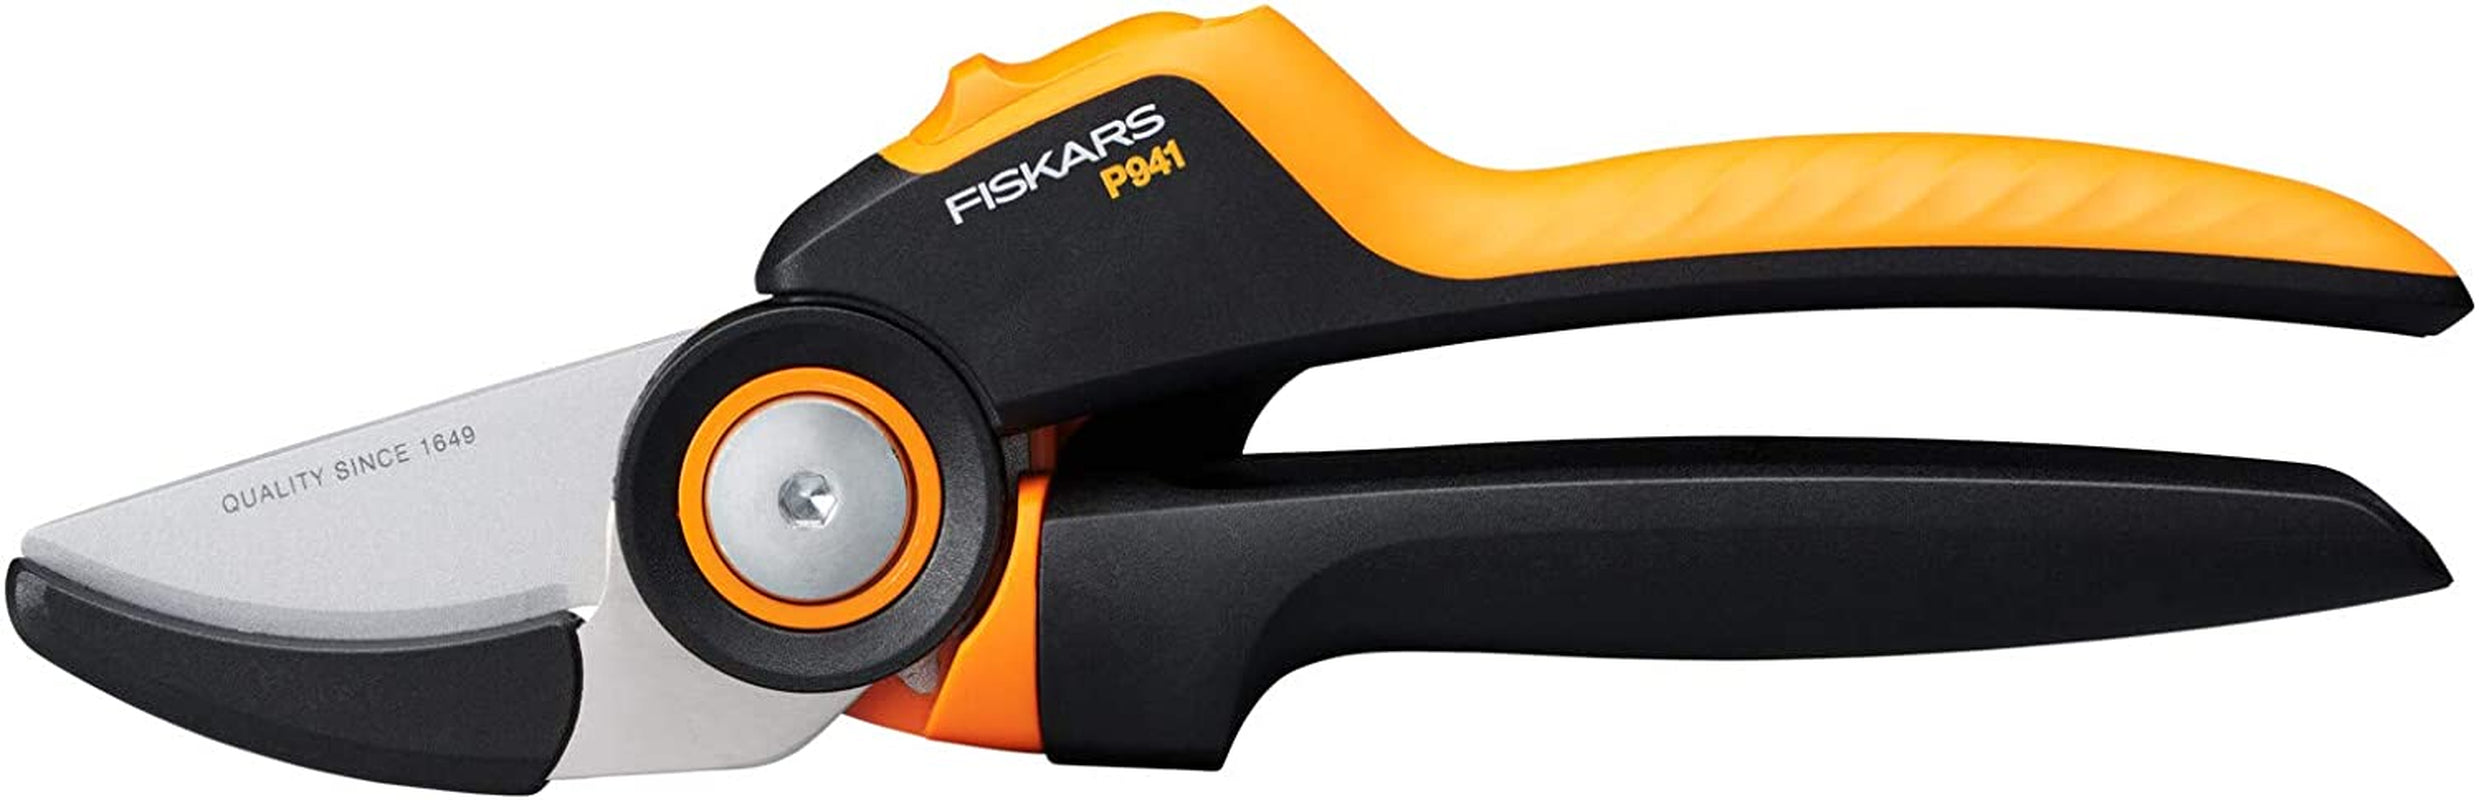 Fiskars, Fiskars Anvil Gardening Shears, X-Series Powergear, P941, with Rolling Handle, for Dry Twigs and Branches, Non-Stick Coated, Stainless Steel Blades, Length: 22,2 Cm, Black/Orange, 1057174